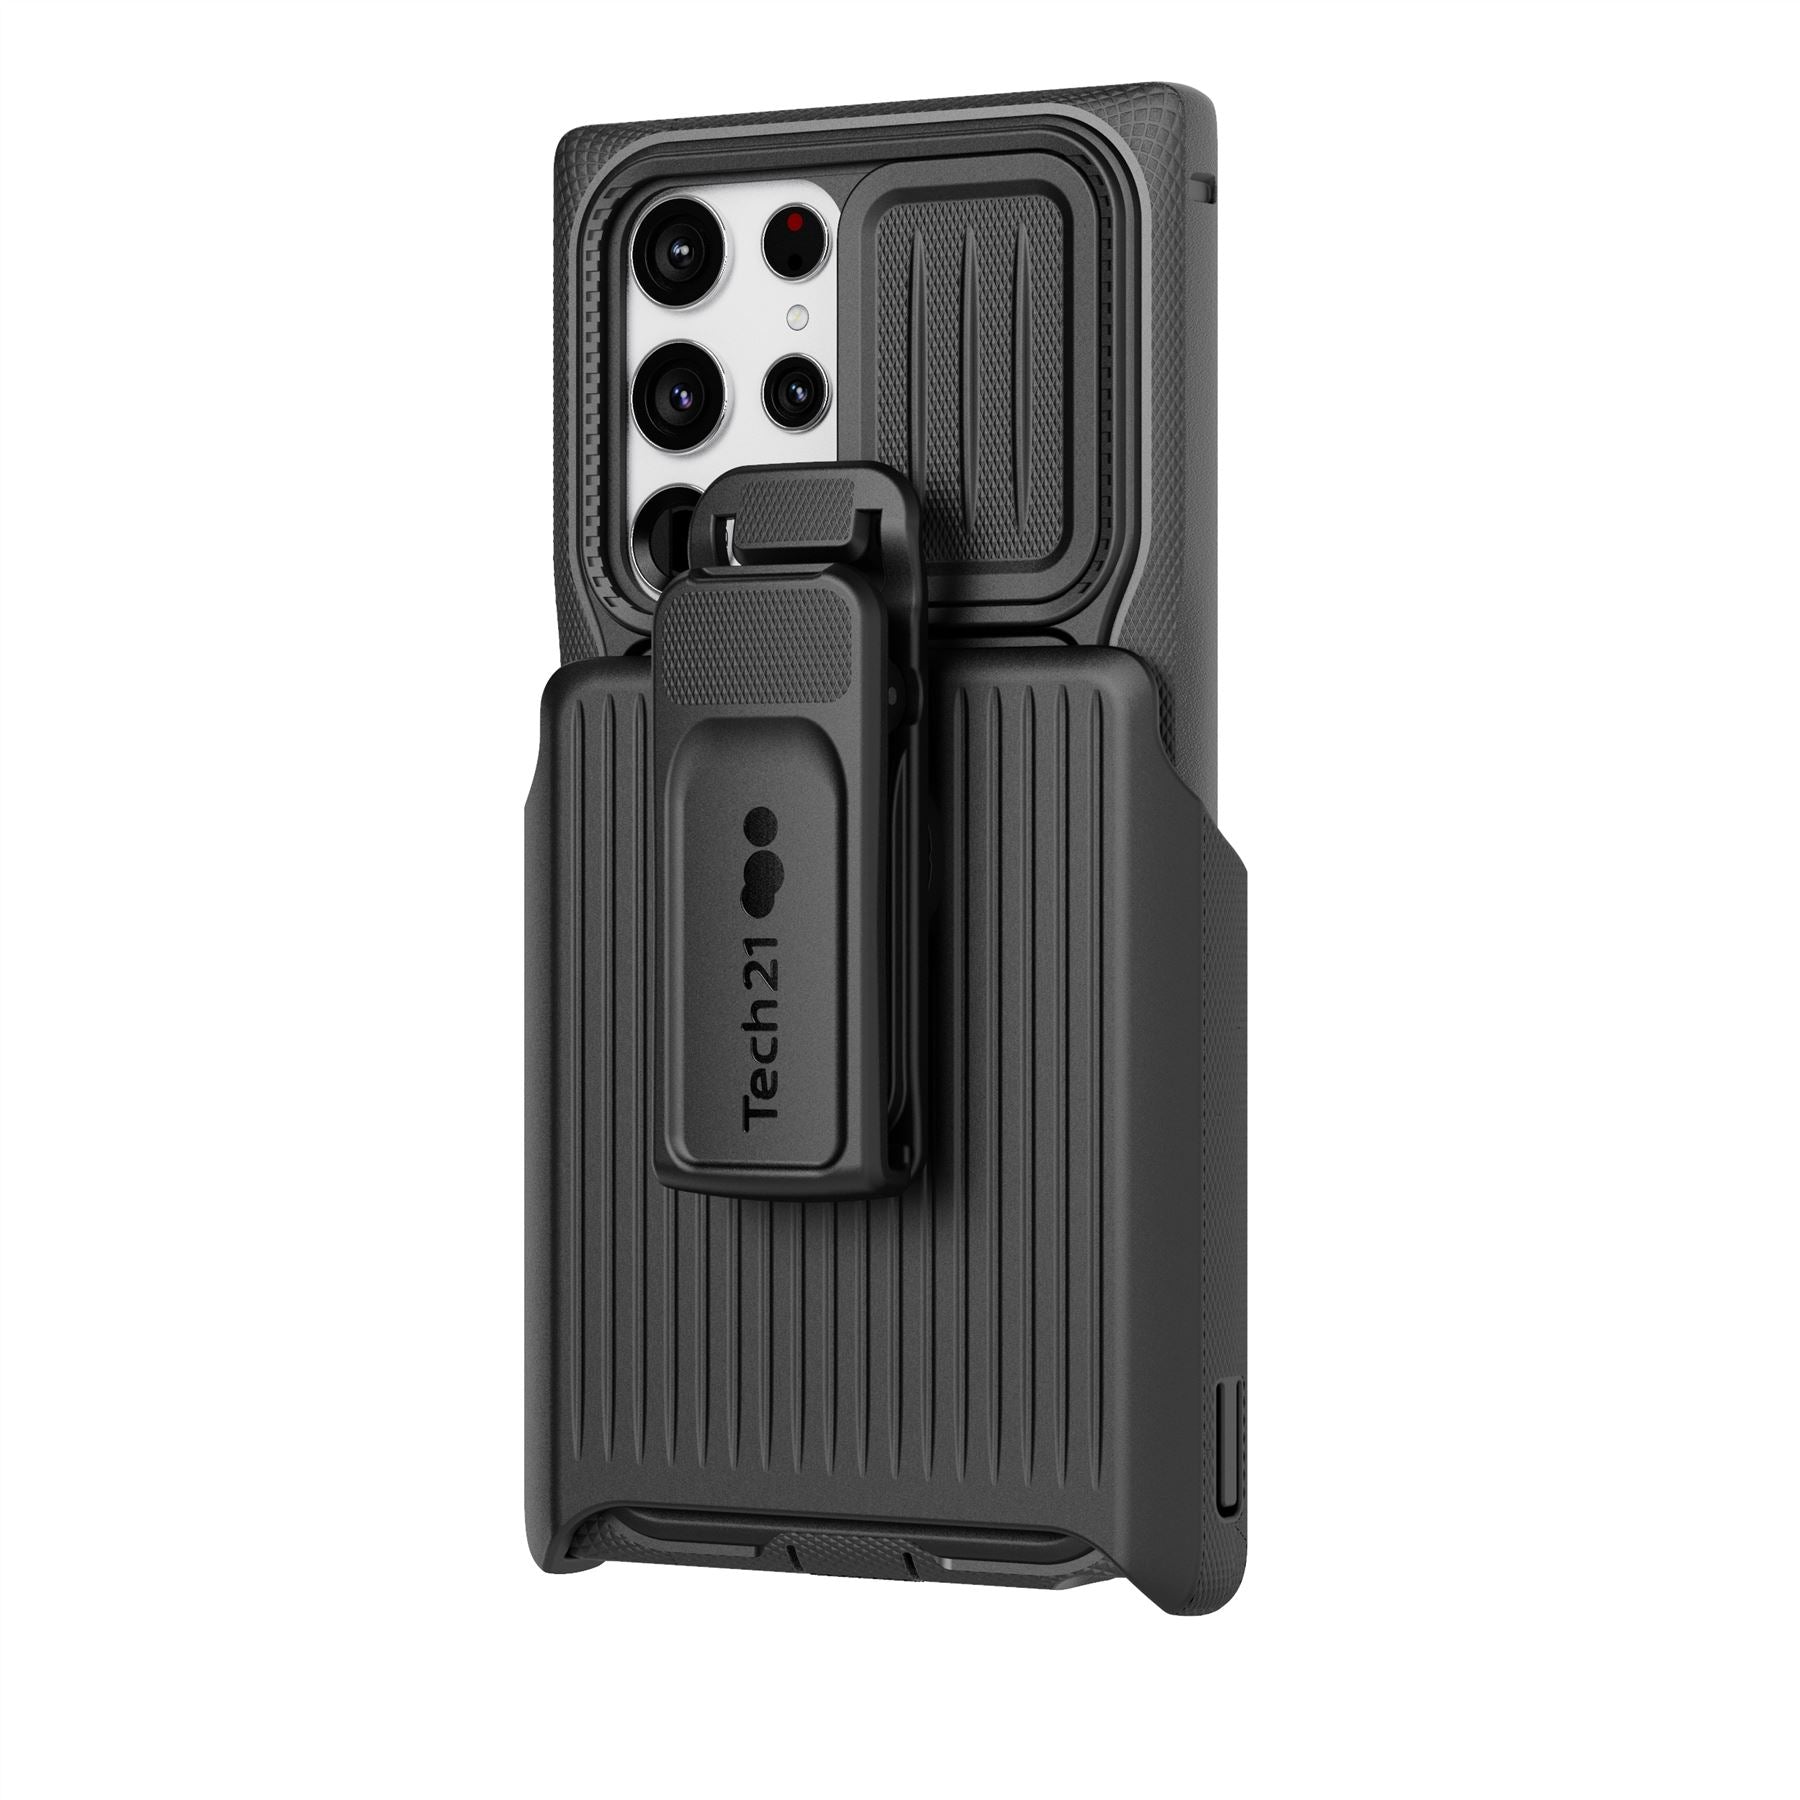 Evo Max - Samsung Galaxy S22 Ultra Case with Holster - Black